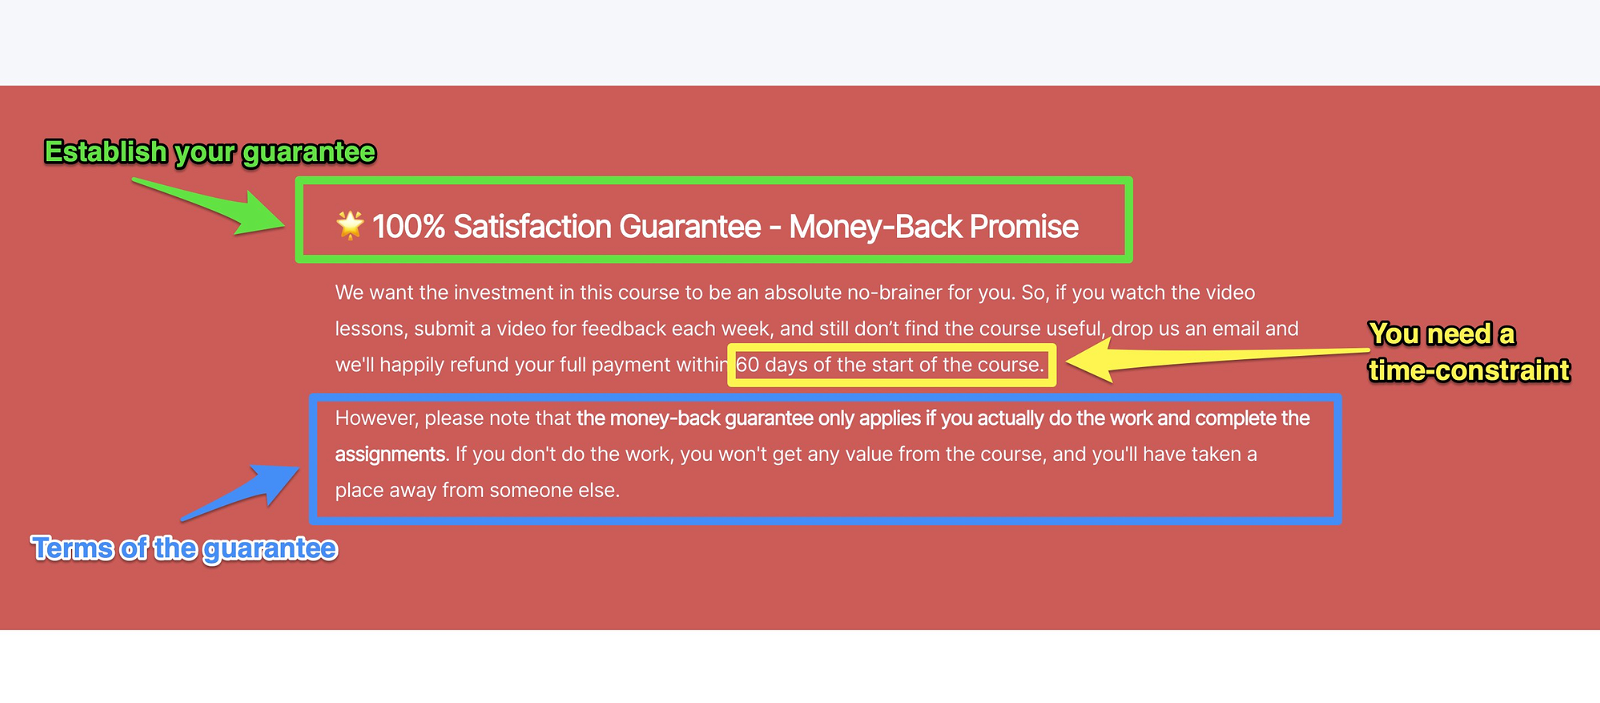 Add a guarantee to your landing page to increase conversions!